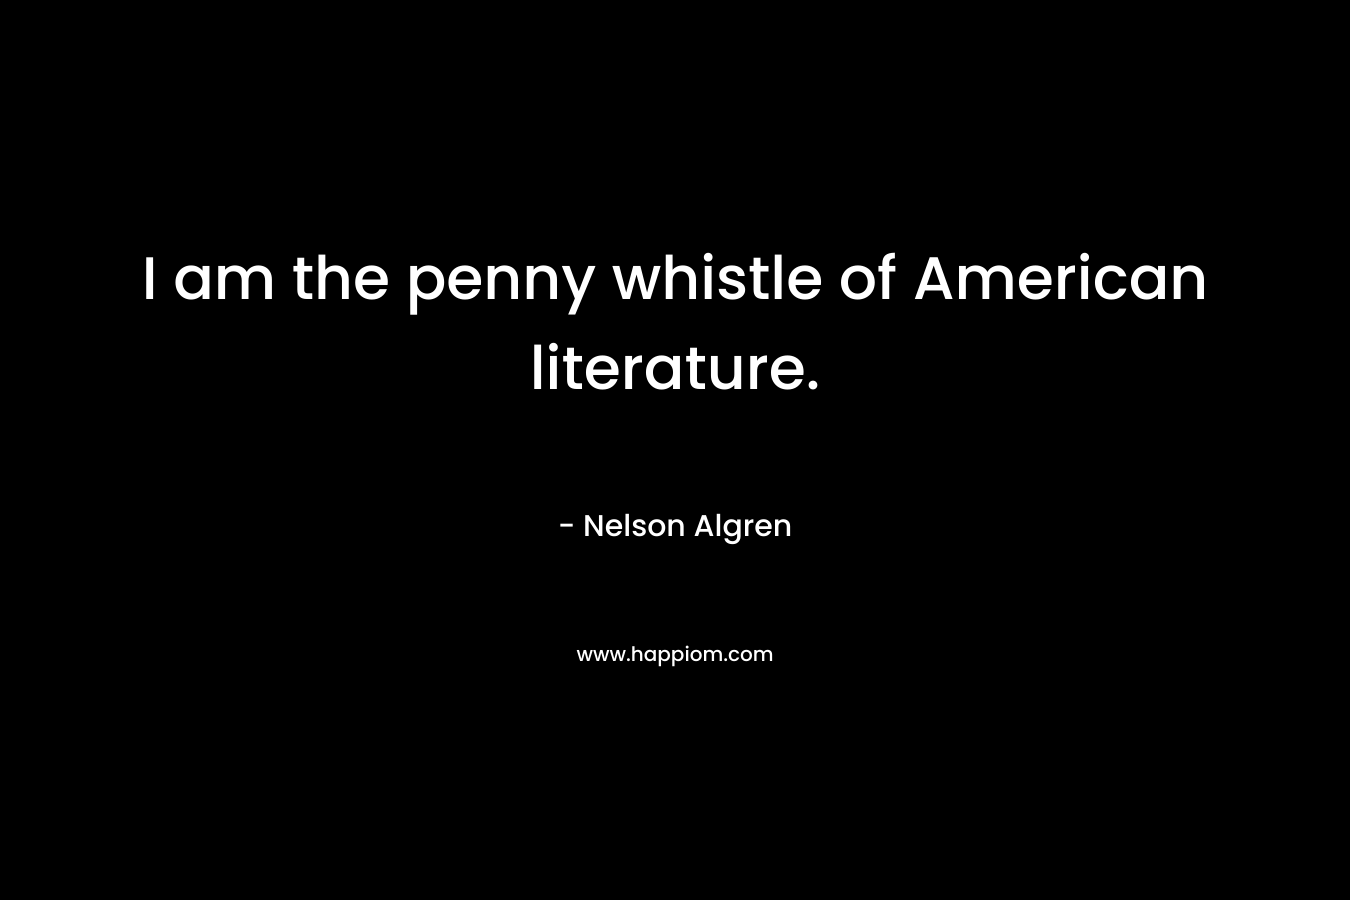 I am the penny whistle of American literature. – Nelson Algren